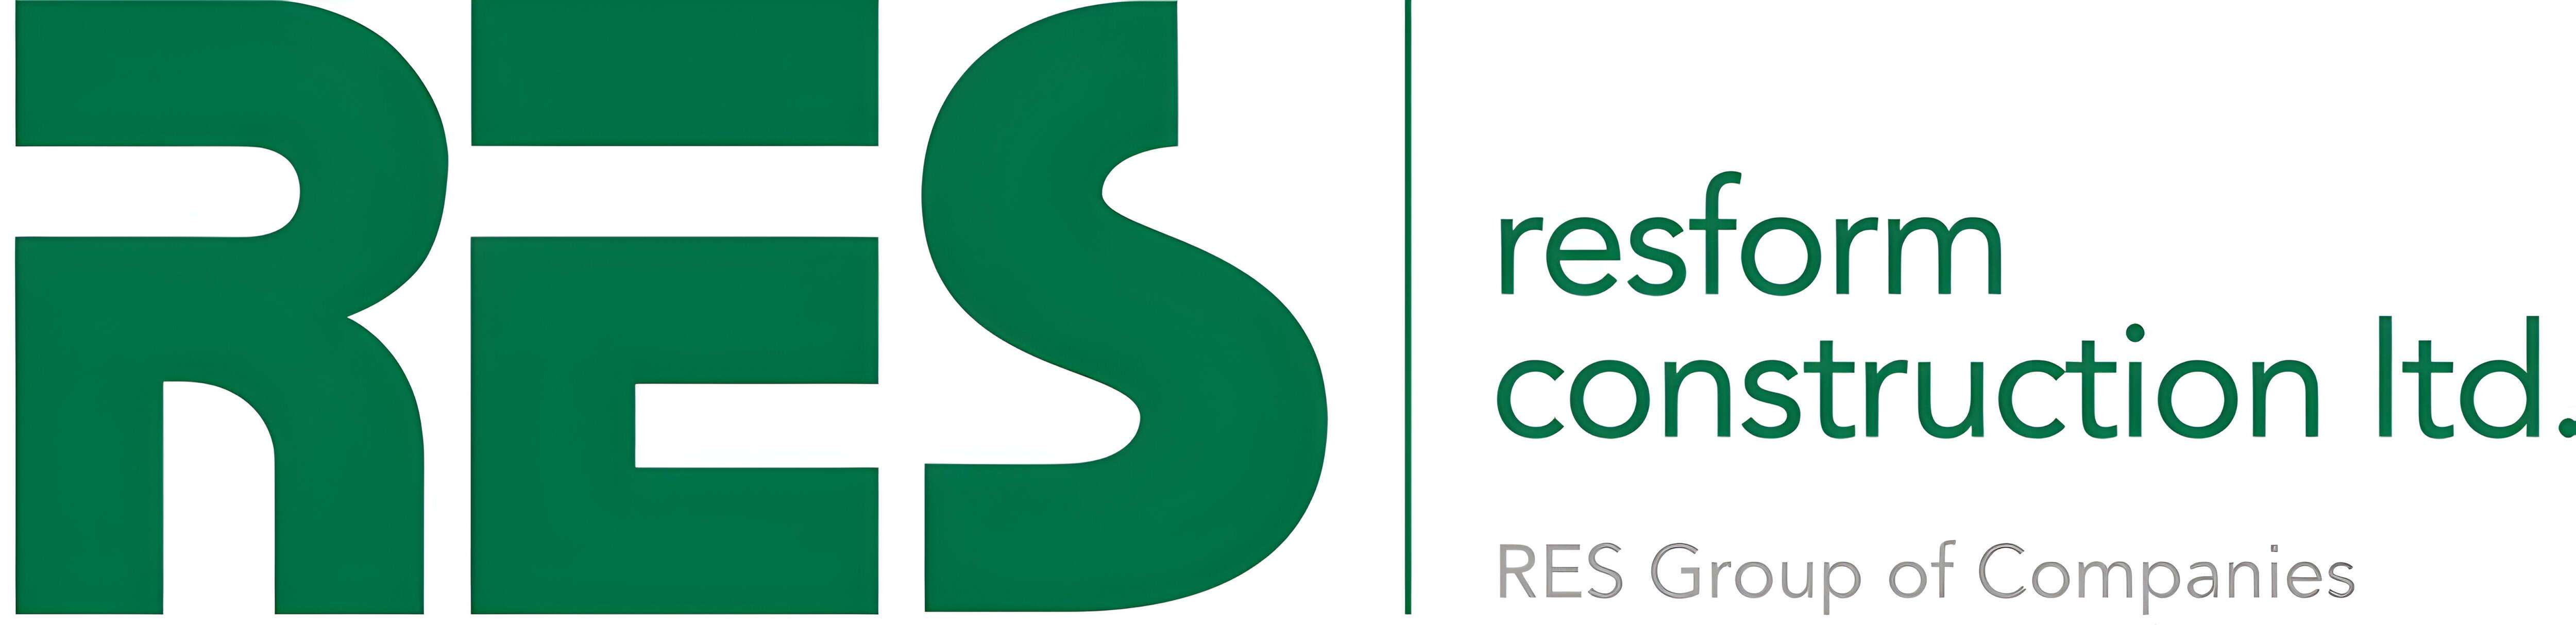 RES Group of Companies